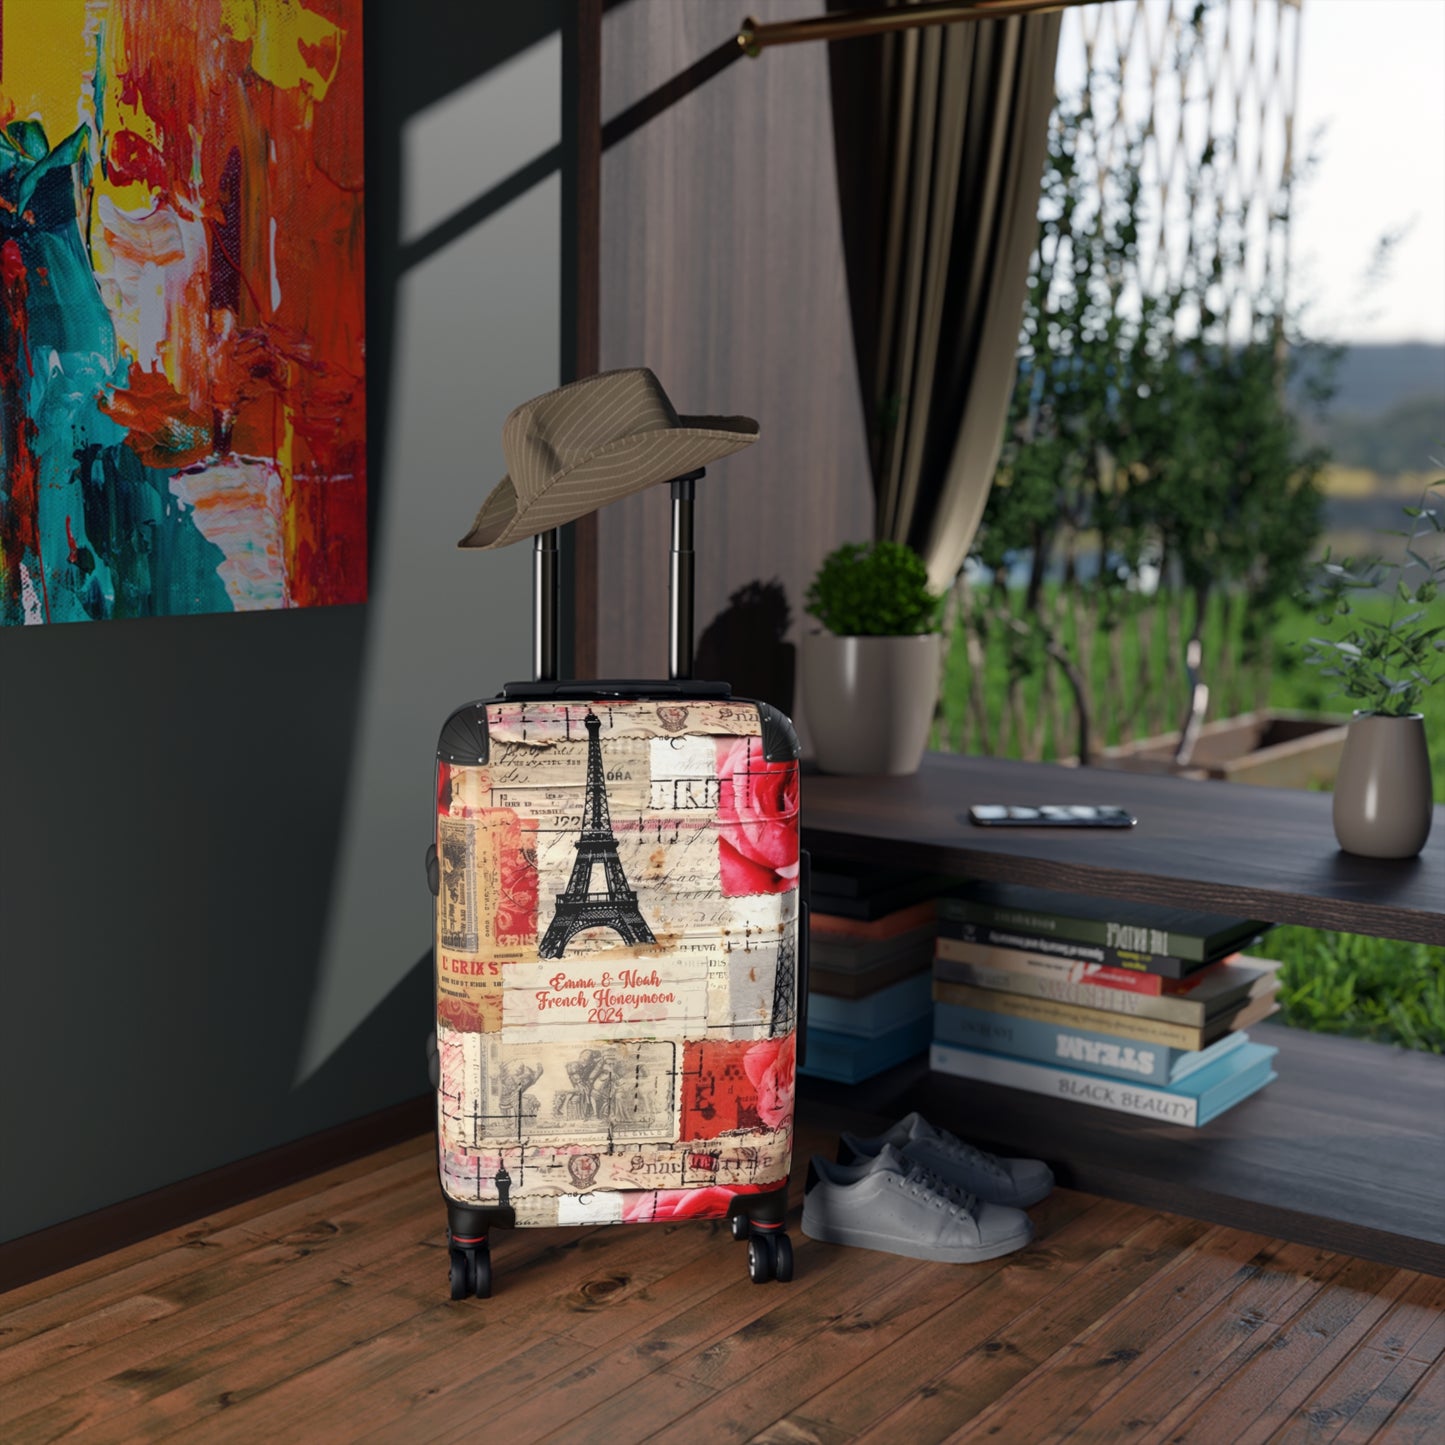 Personalized Vintage France Inspired Stylish & Unique Hard-Shell Suitcase: Durable, Lightweight, Expandable Luggage with 360° Swivel Wheels & Secure Lock for Fashion-Forward Travelers, Free US Shipping